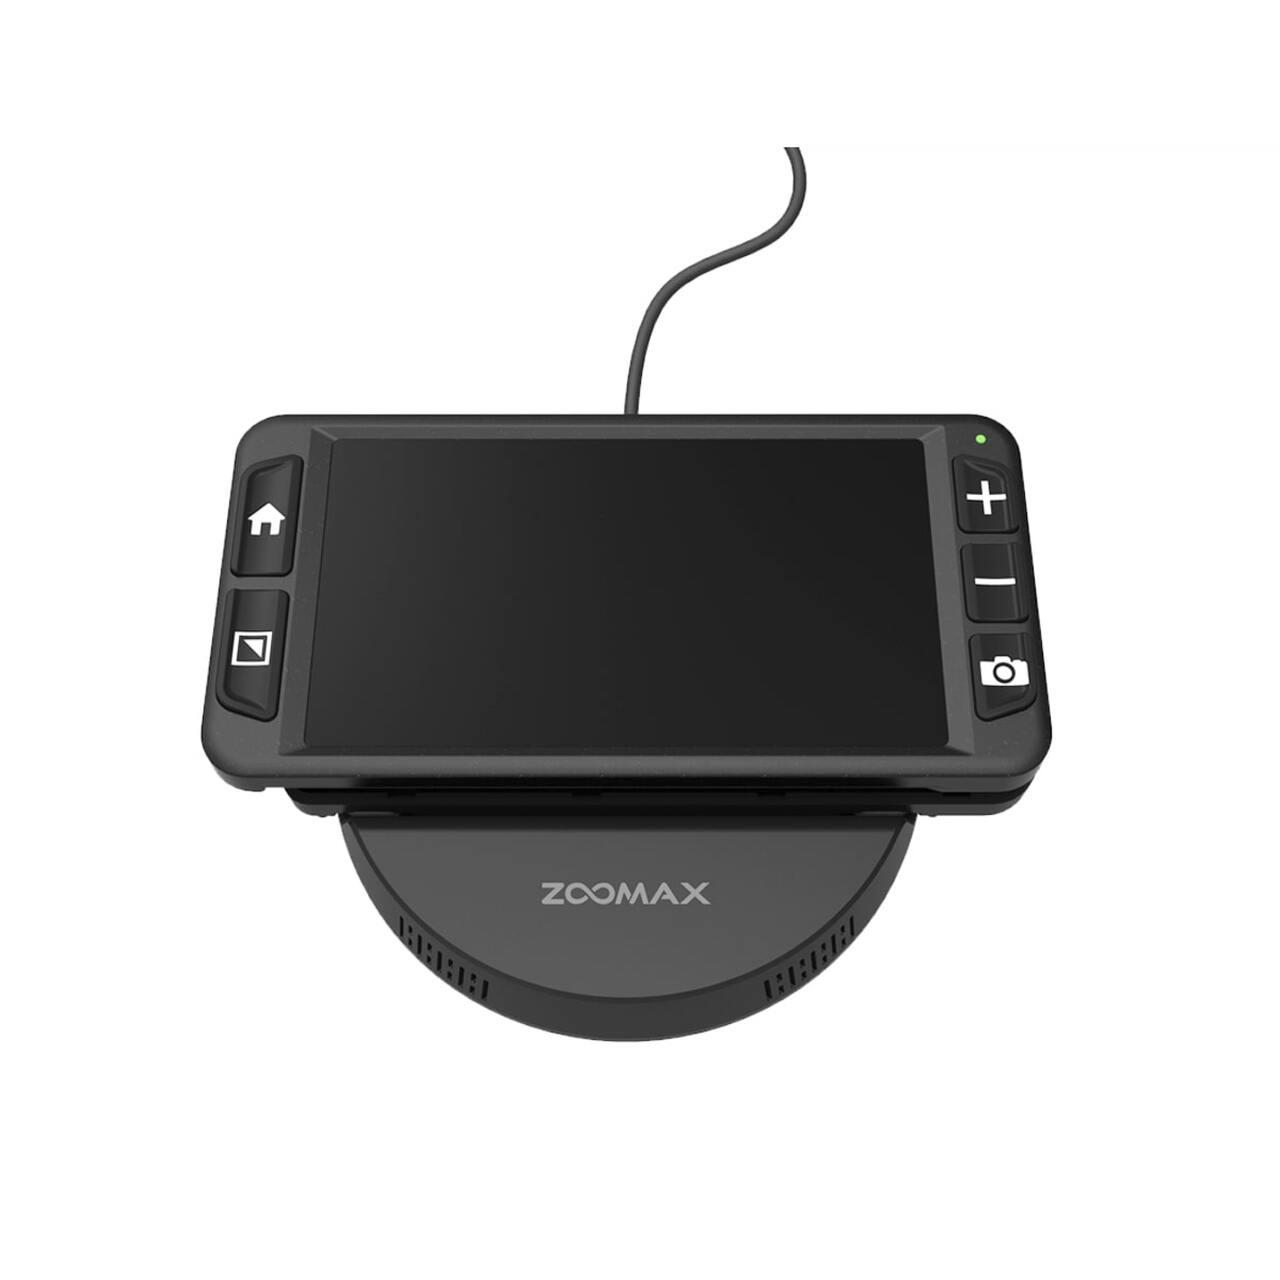 The Luna 6 placed on its wireless charger